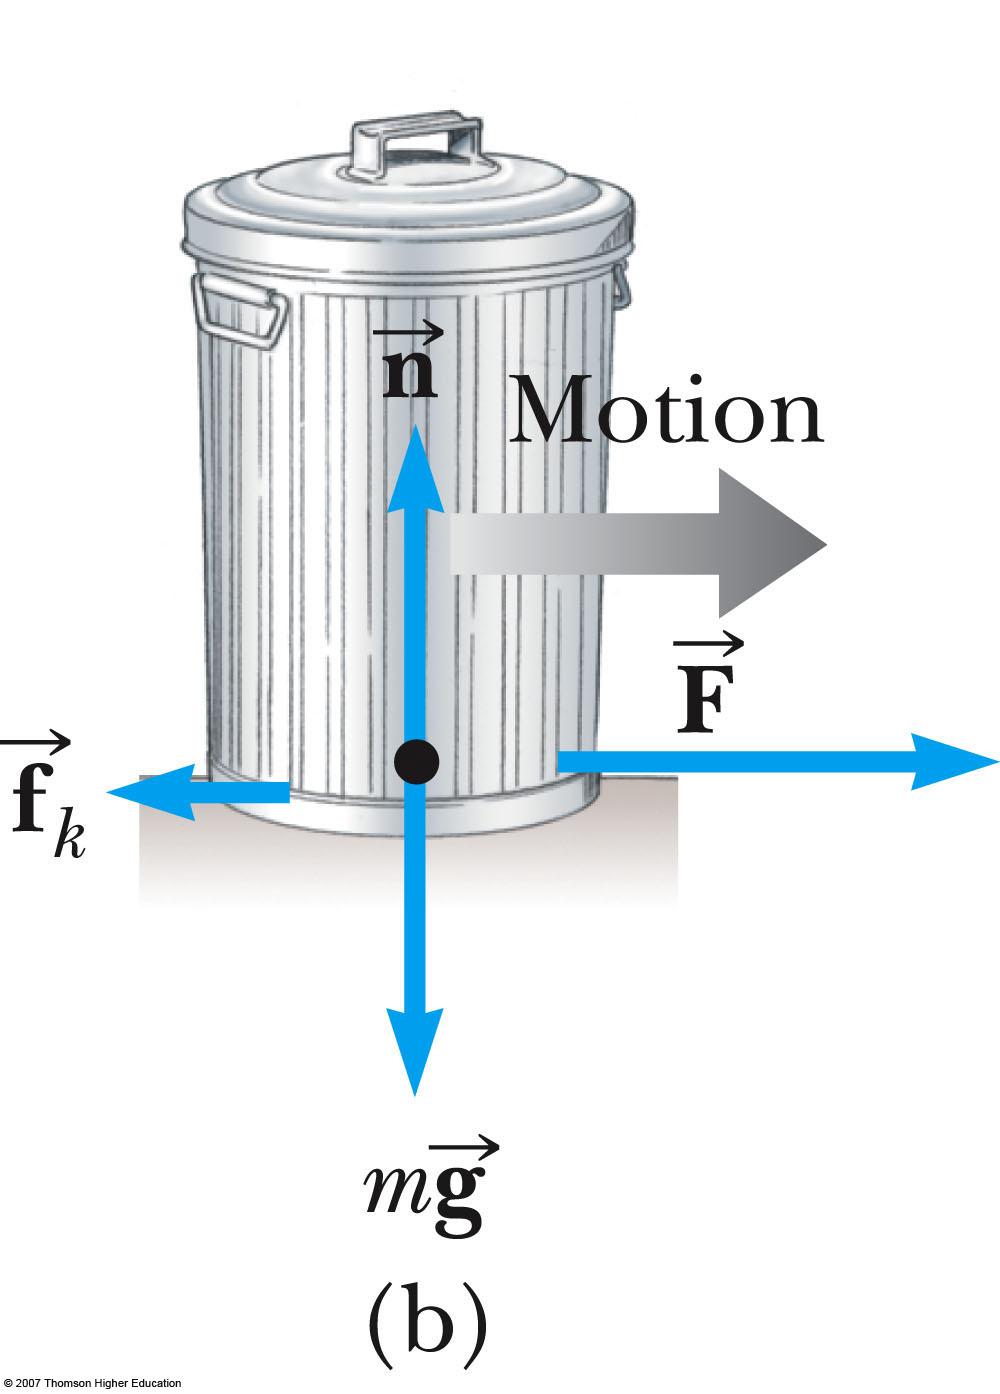 q The force of kinetic friction acts when the object is in motion q Although µ k can